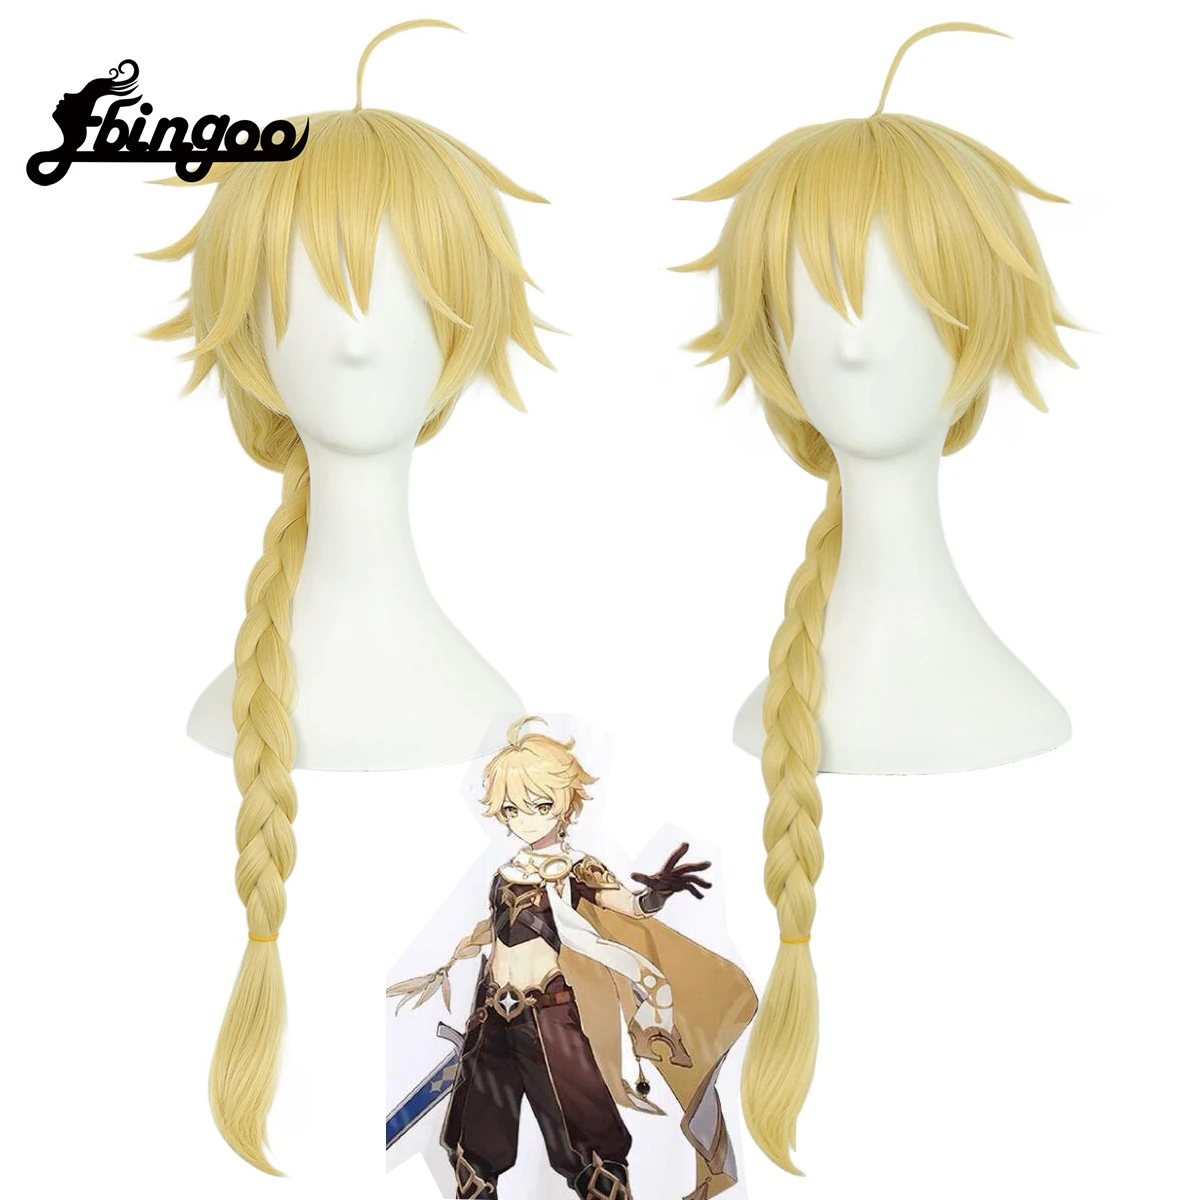 Ebingoo Synthetic Genshin Impact Aether Cosplay Wig Golden Braid Heat Resistant Synthetic Hair Wigs Halloween Party  Anime Wig ranyu genshin impact klee wig synthetic straight short blonde game cosplay hair heat resistant wig for party